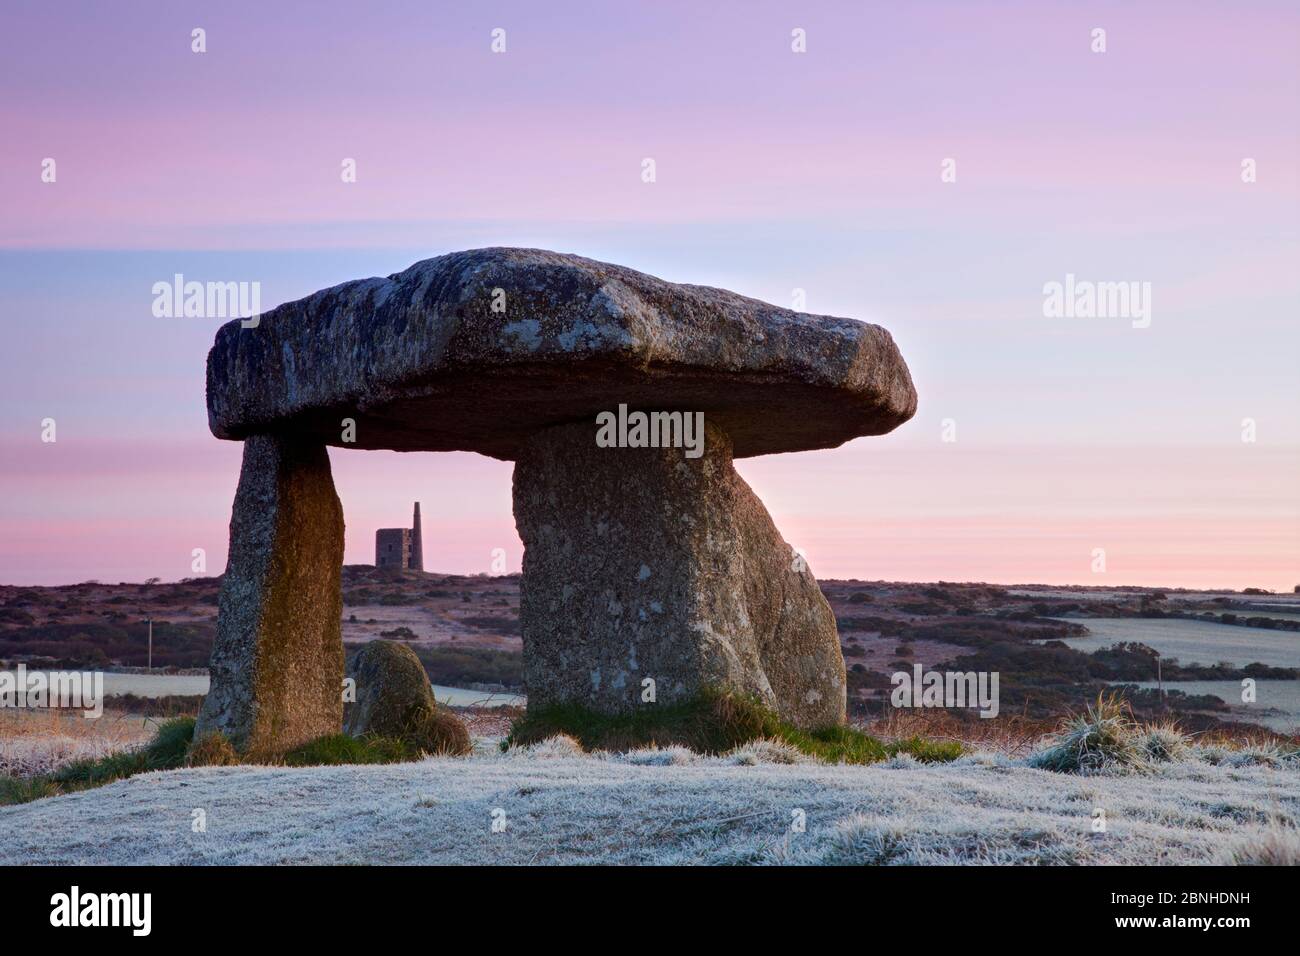 Lanyon Quoit ancient burial chamber, Madron, Cornwall, England, UK. March 2010. Stock Photo